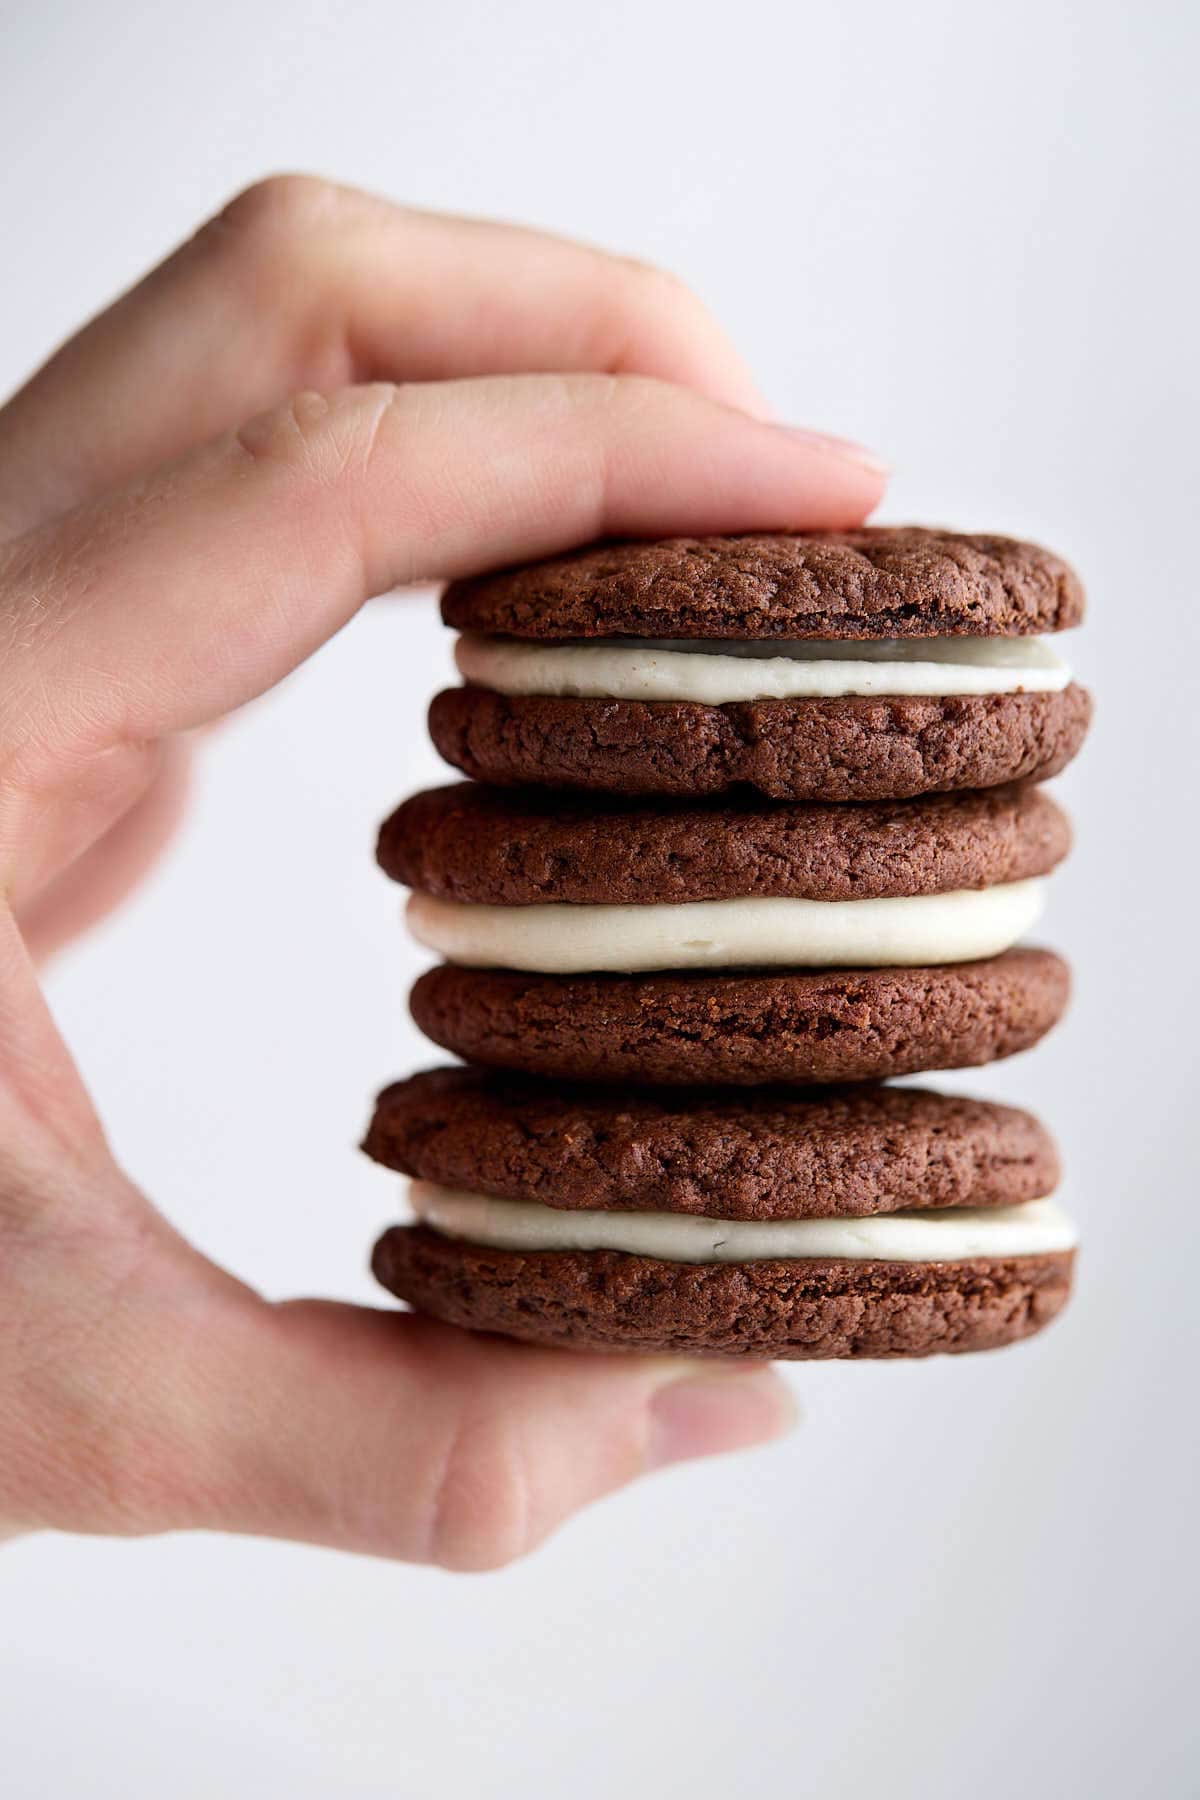 Fingers holding a stack of 3 Oreo cake mix cookies.